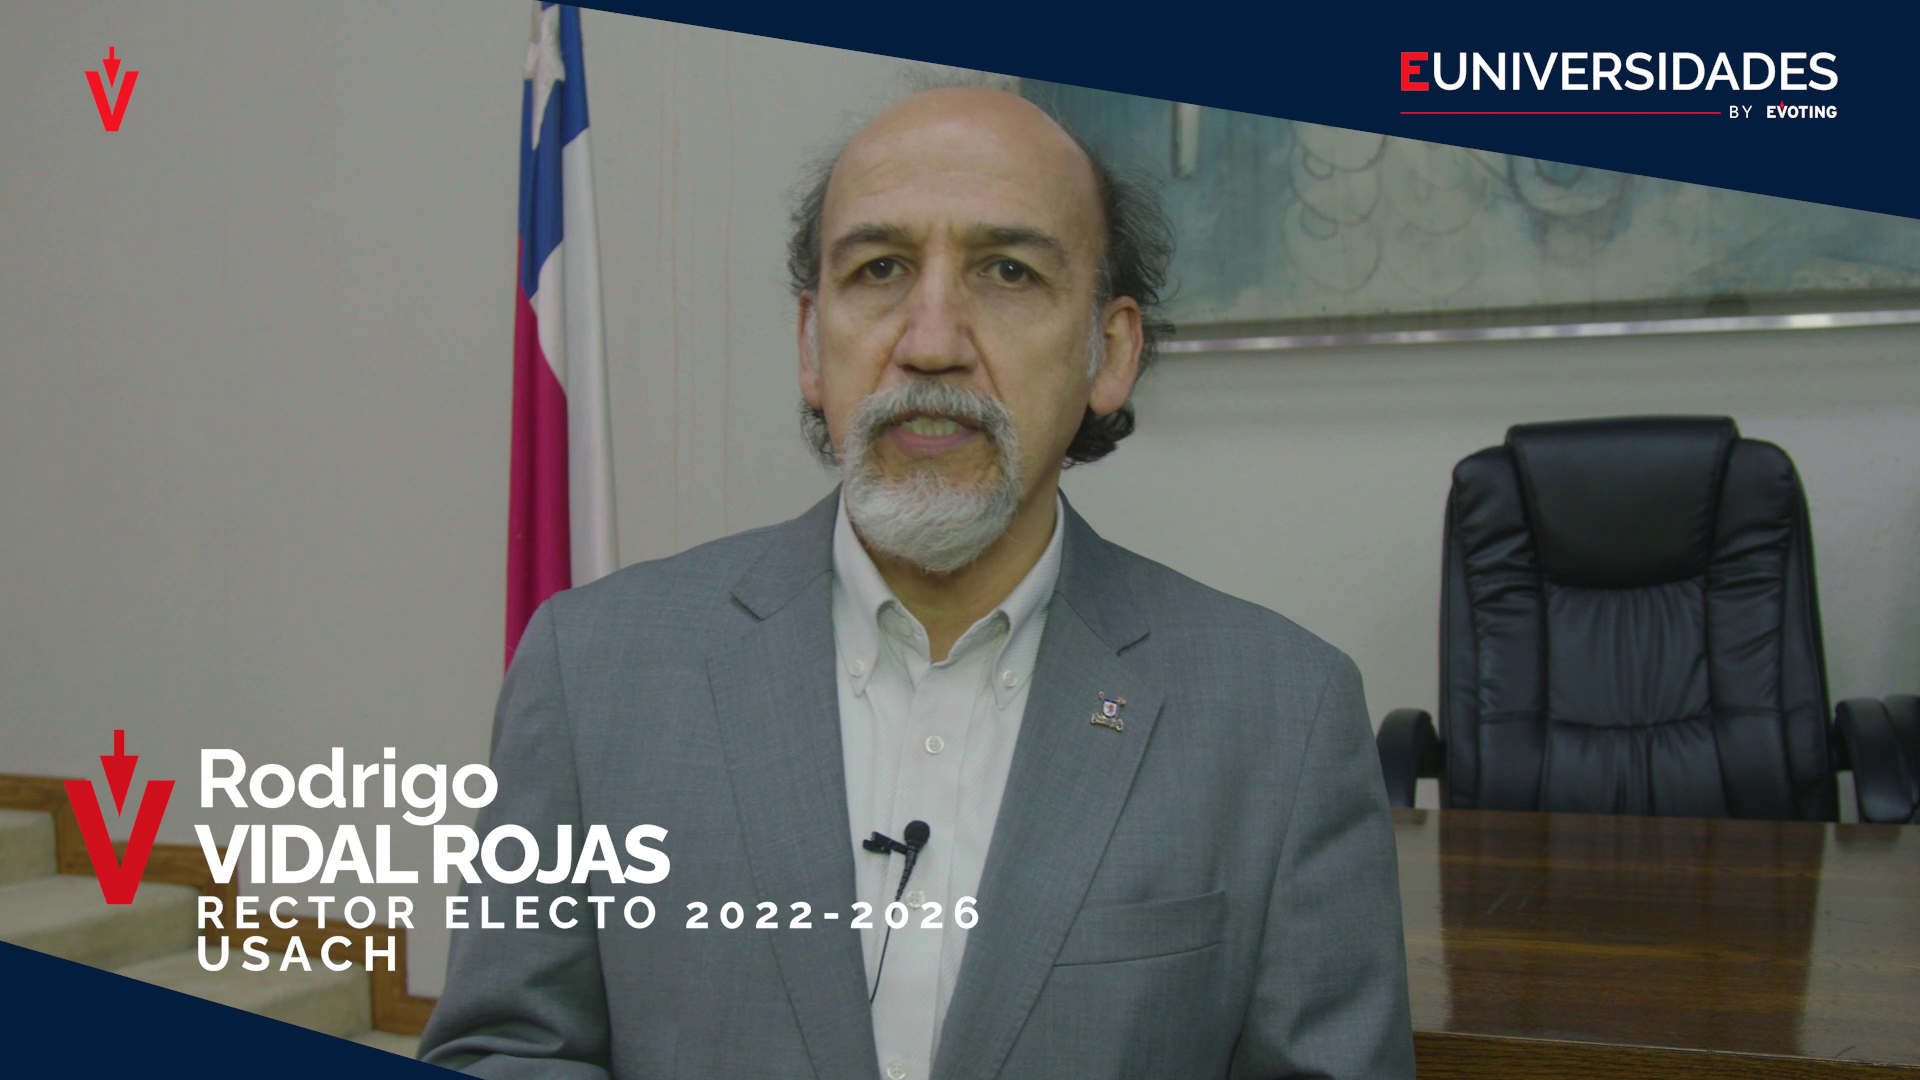 Rodrigo Vidal, Rector of the University of Santiago de Chile, highlights the importance of new technologies in electoral processes, after his election with EVoting's platform.